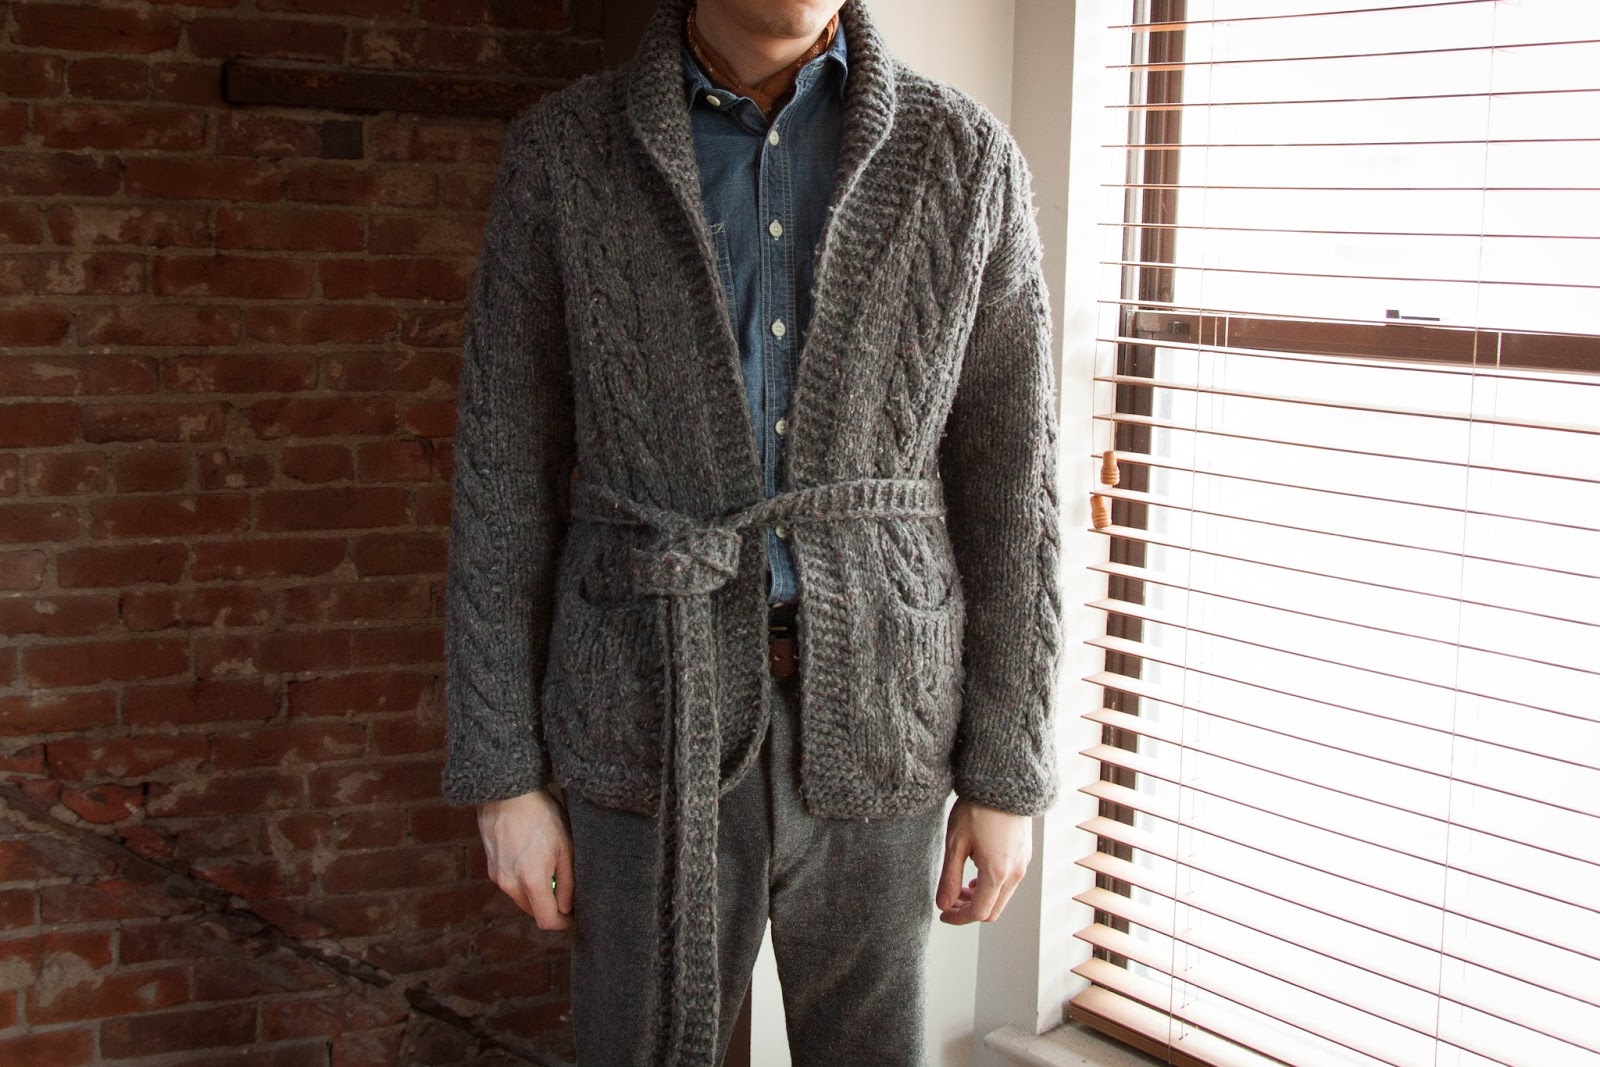 What I Wore - Engineered Garments and the Fight Against the